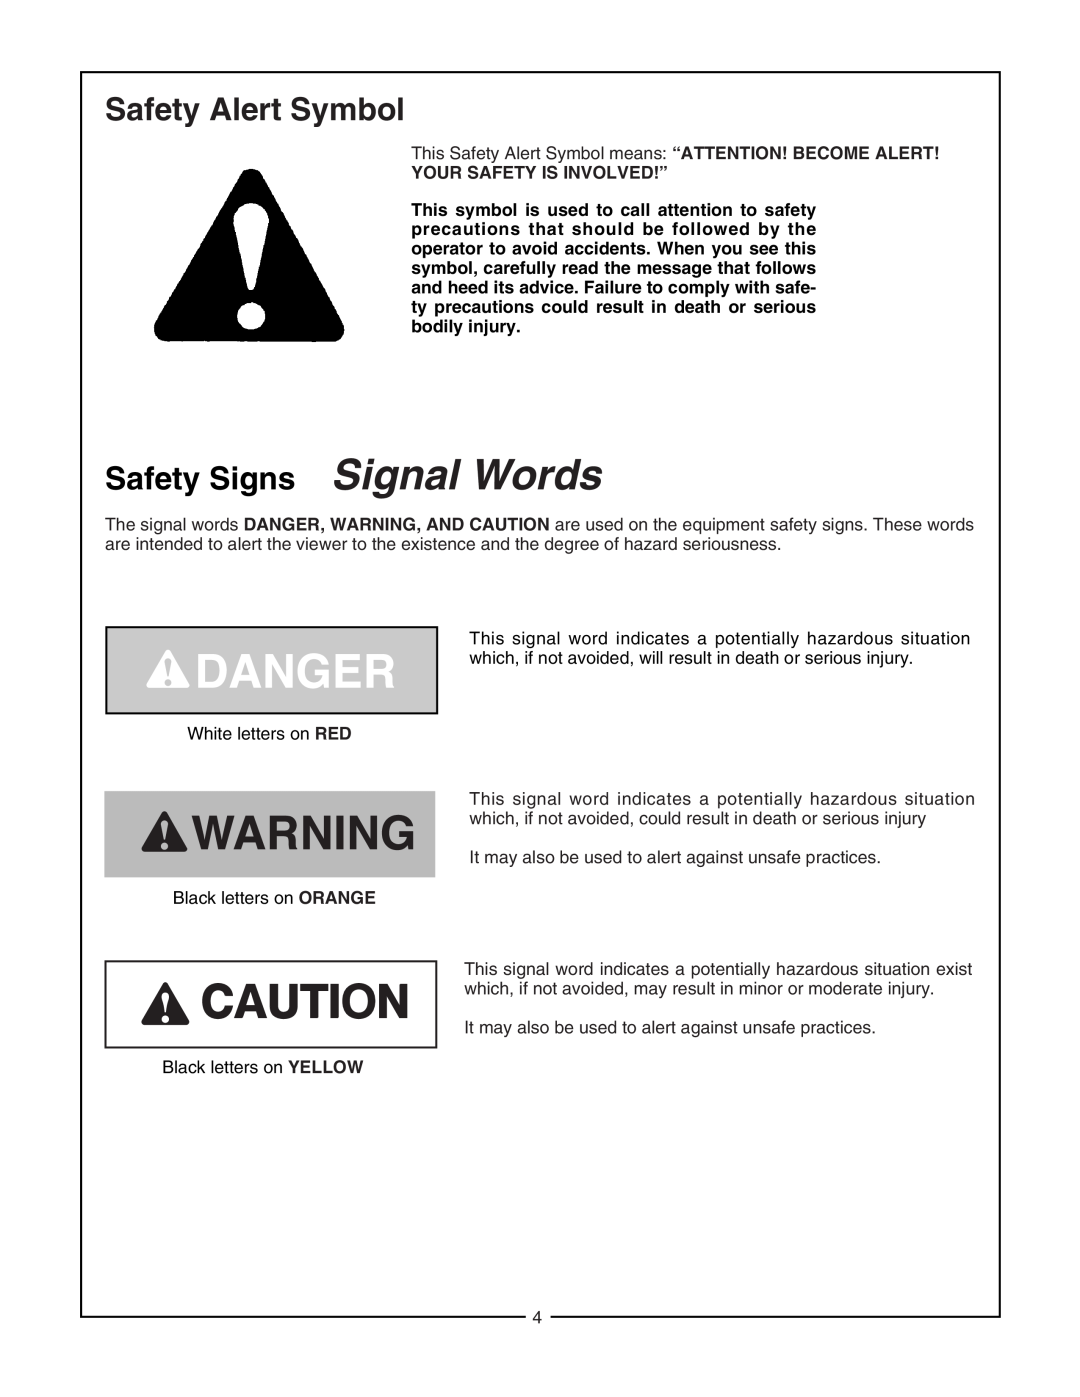 Bush Hog 2165 manual Safety Alert Symbol, Safety Signs Signal Words, Your Safety Is Involved!” 